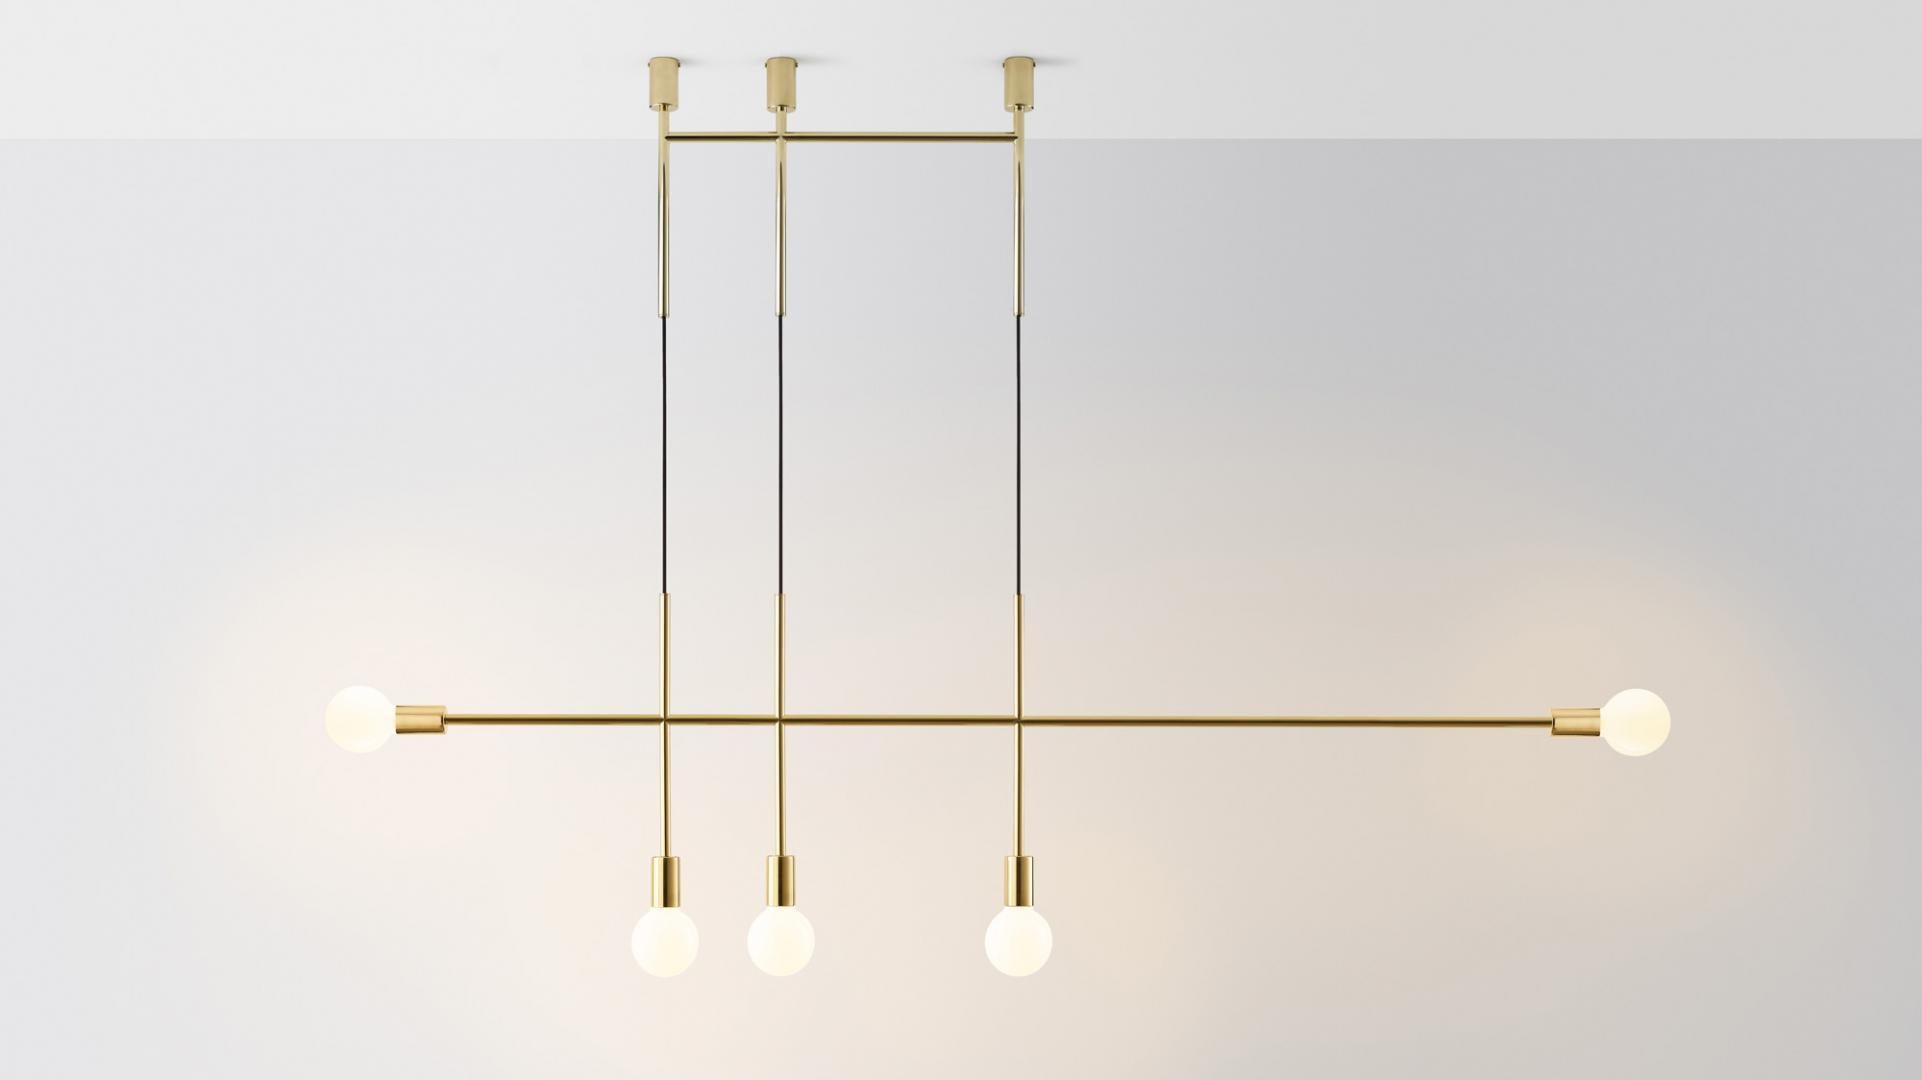 Big kick solid pendant light by Volker Haug
Dimensions: W 200 x H 108 cm (Suspension cord visible).
Material: Brass. 
Finish: Polished, aged, brushed, bronzed, blackened, or plated
Lamp: Opal G95 LED (E26/E27 110 - 240V, 12V version